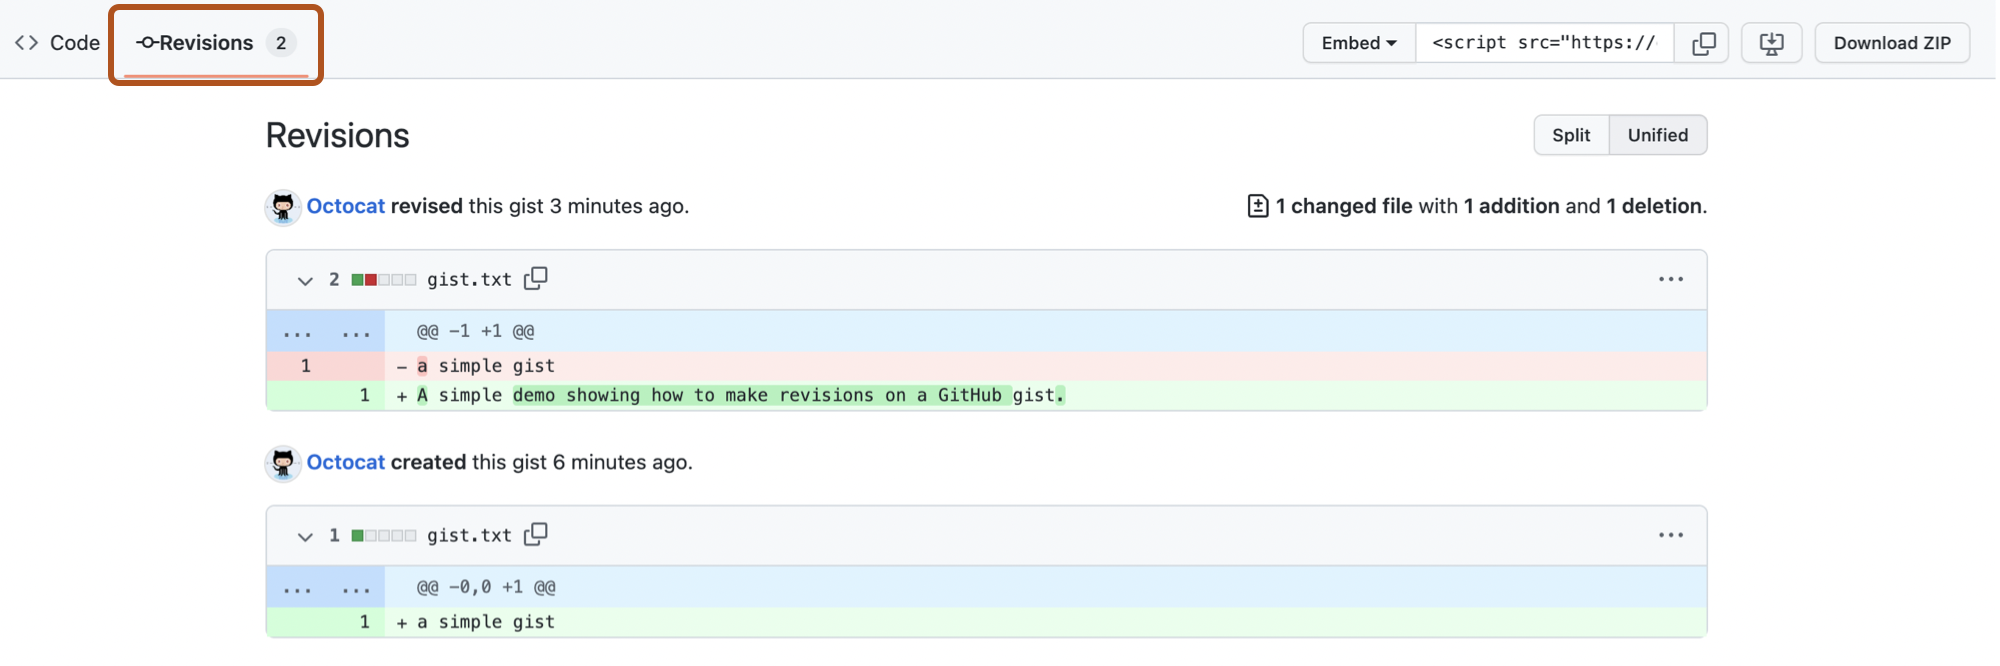 Screenshot of the "Revisions" page in GitHub Gist. A tab, labeled “Revisions”, is outlined in dark orange.